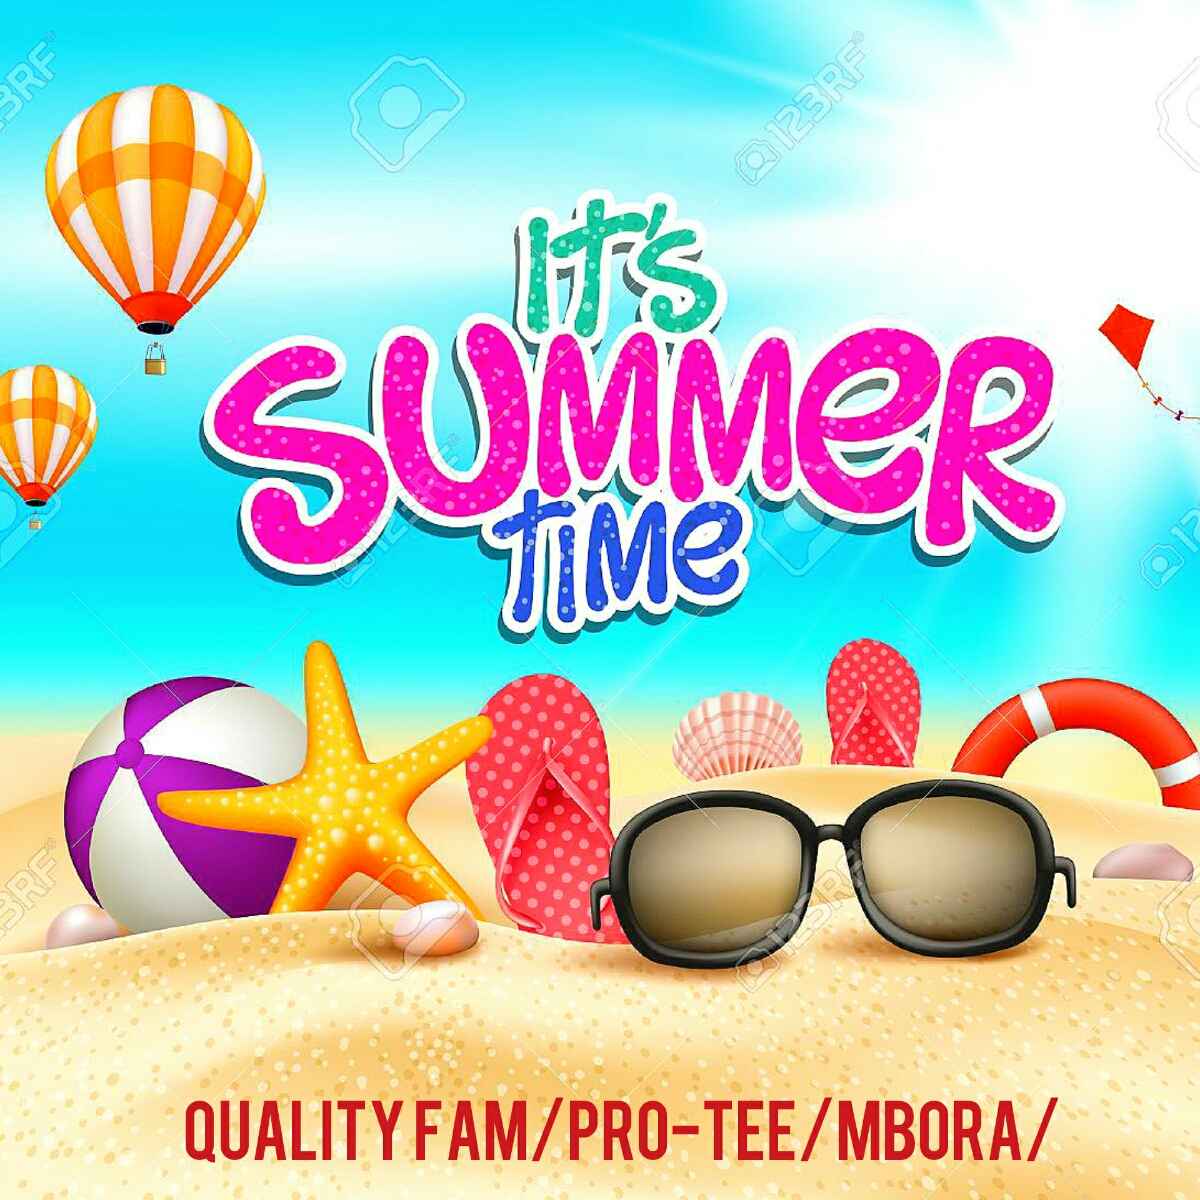 Pro-Tee, Quality Fam & Mbora Summer Time (Heaven Or Hell 2)